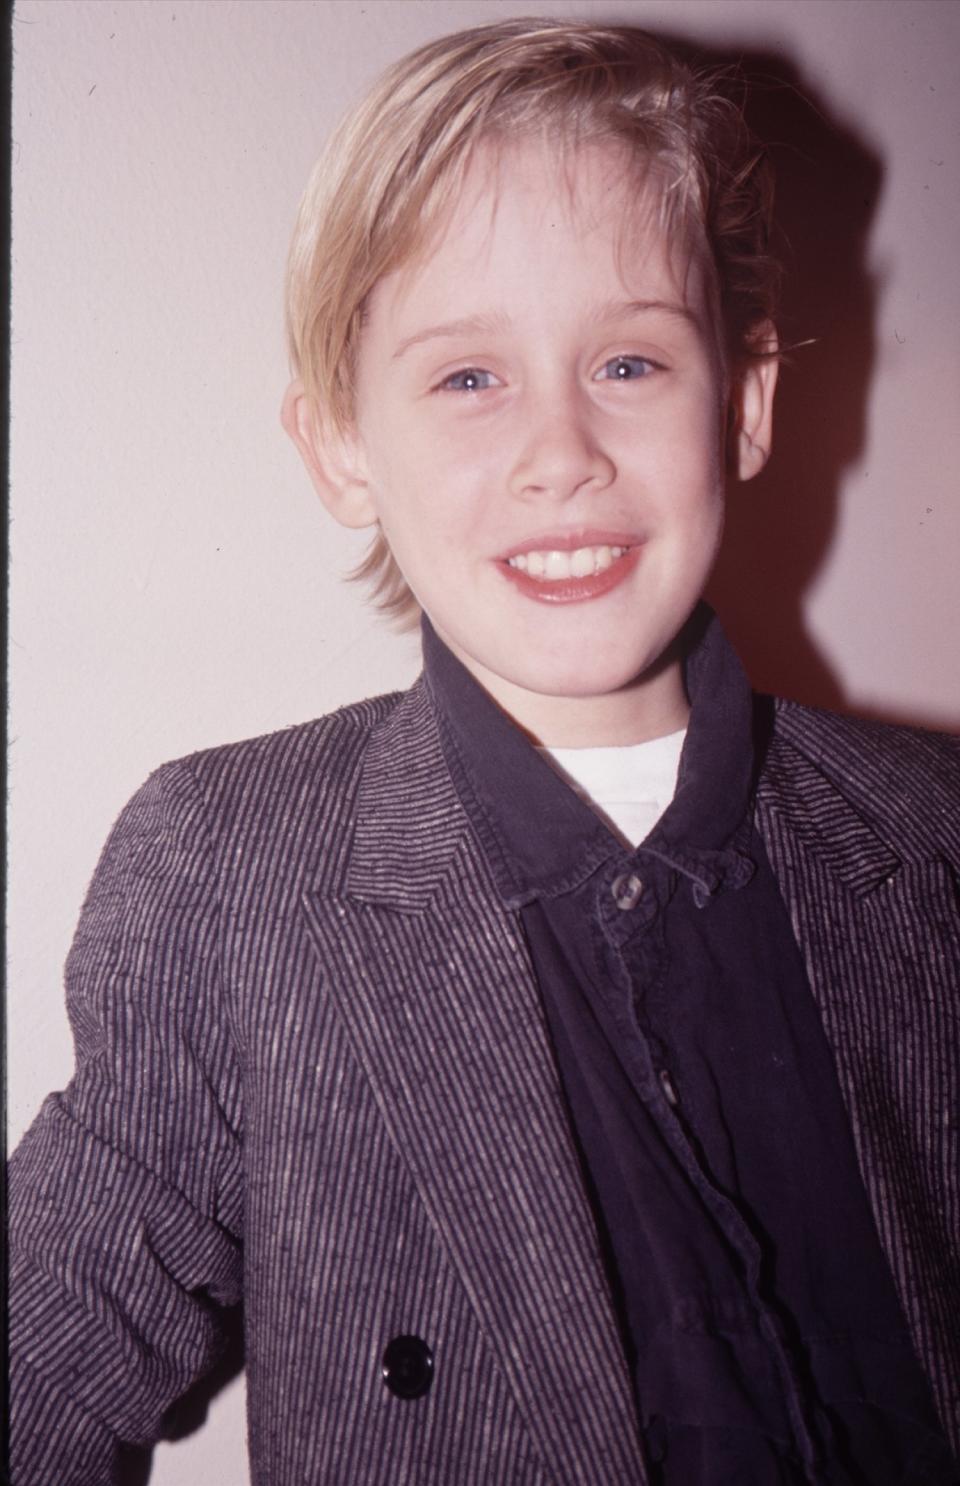 Macaulay Culkin started acting at the age of 5 and became well-known for his Home Alone films from the 90s.